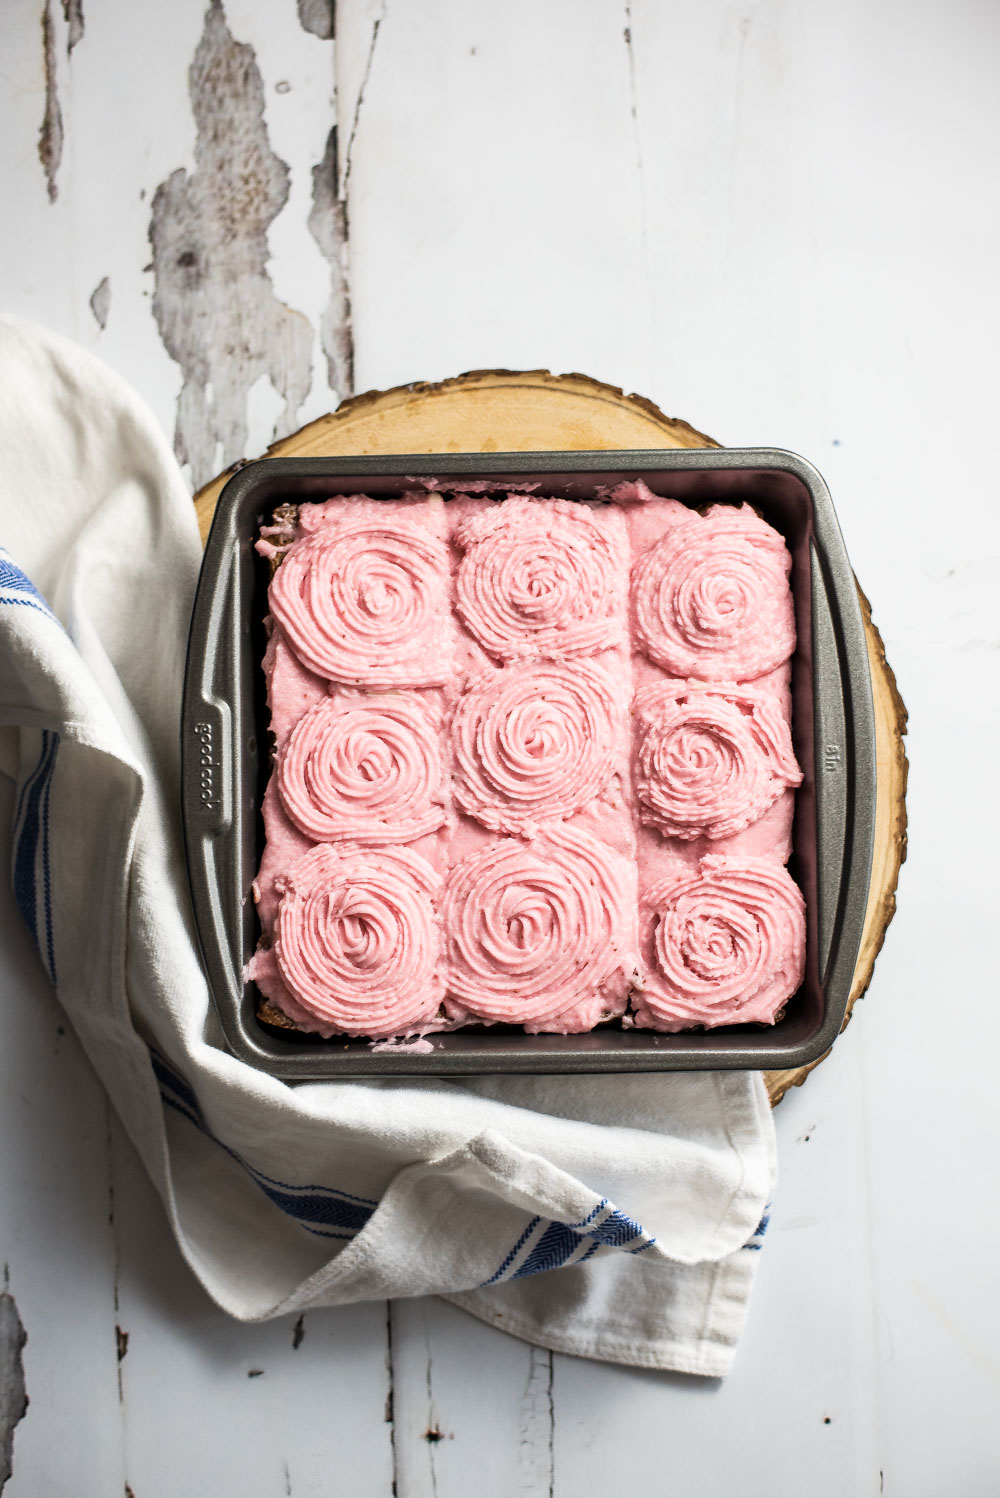 These Fudgy Chocolate Stout Brownies with Strawberry Buttercream are the perfect spring treat. They are bursting with strawberry flavor!